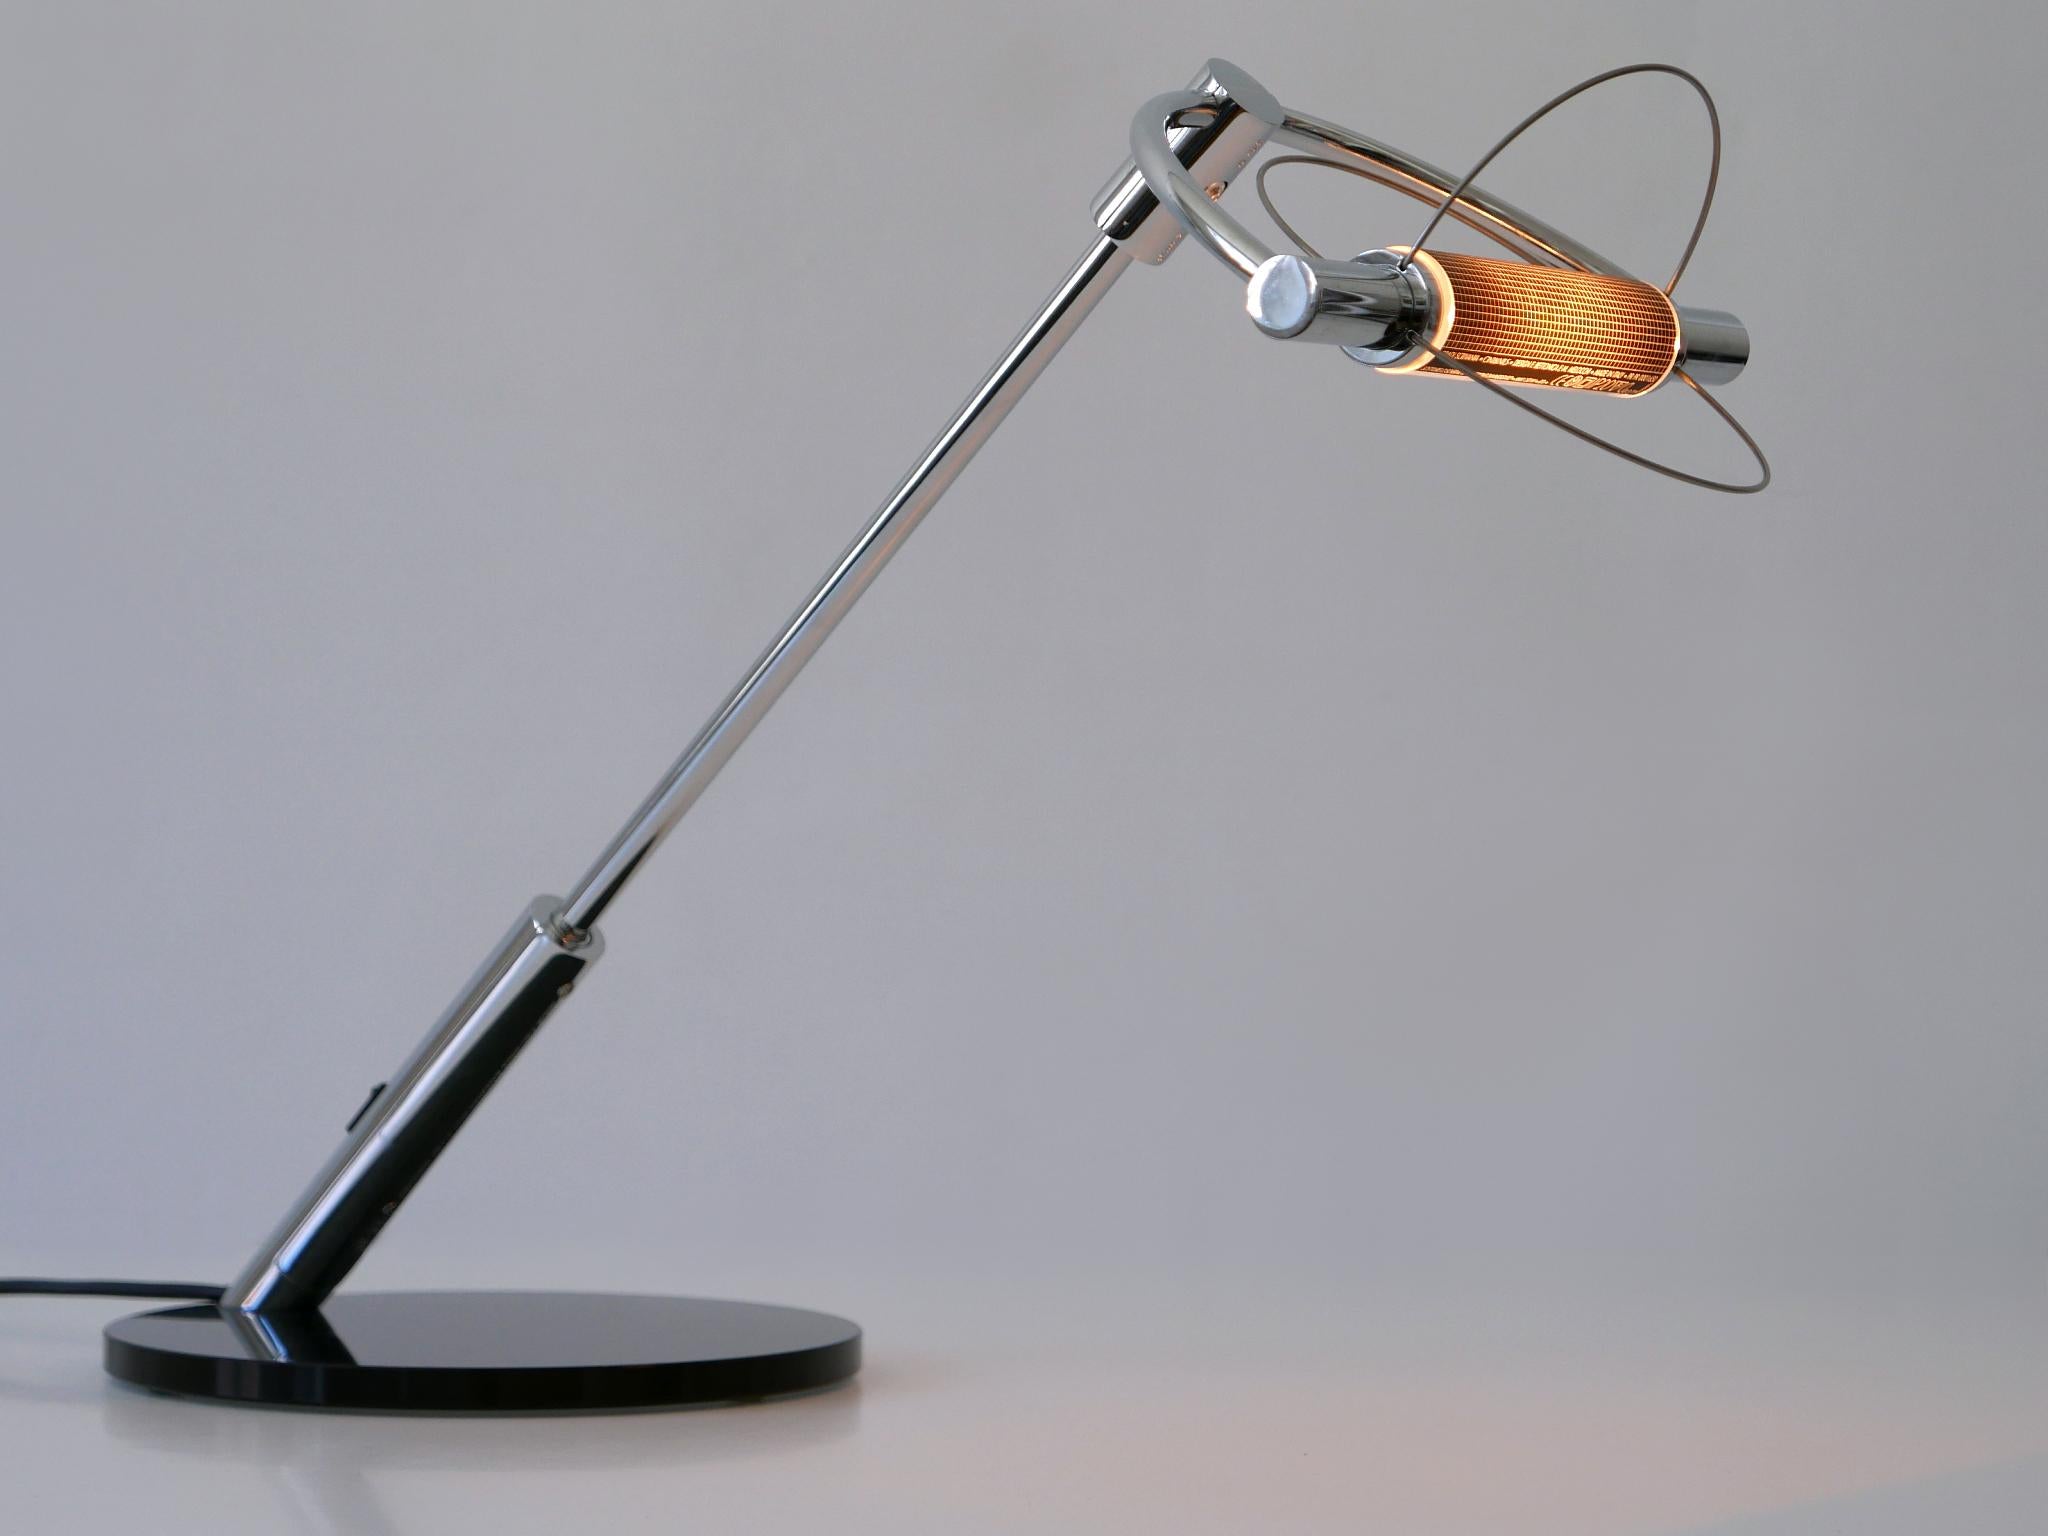 Elegant and adjustable Postmodern table lamp or desk light 'Gradi Scrivania'. The lamp shade adjustable in height. Rotating diffuser and dimmer. Designed by Franco Bettonica & Mario Melocchi for Cini & Nils, Italy., 1990. Signed to the diffuser and